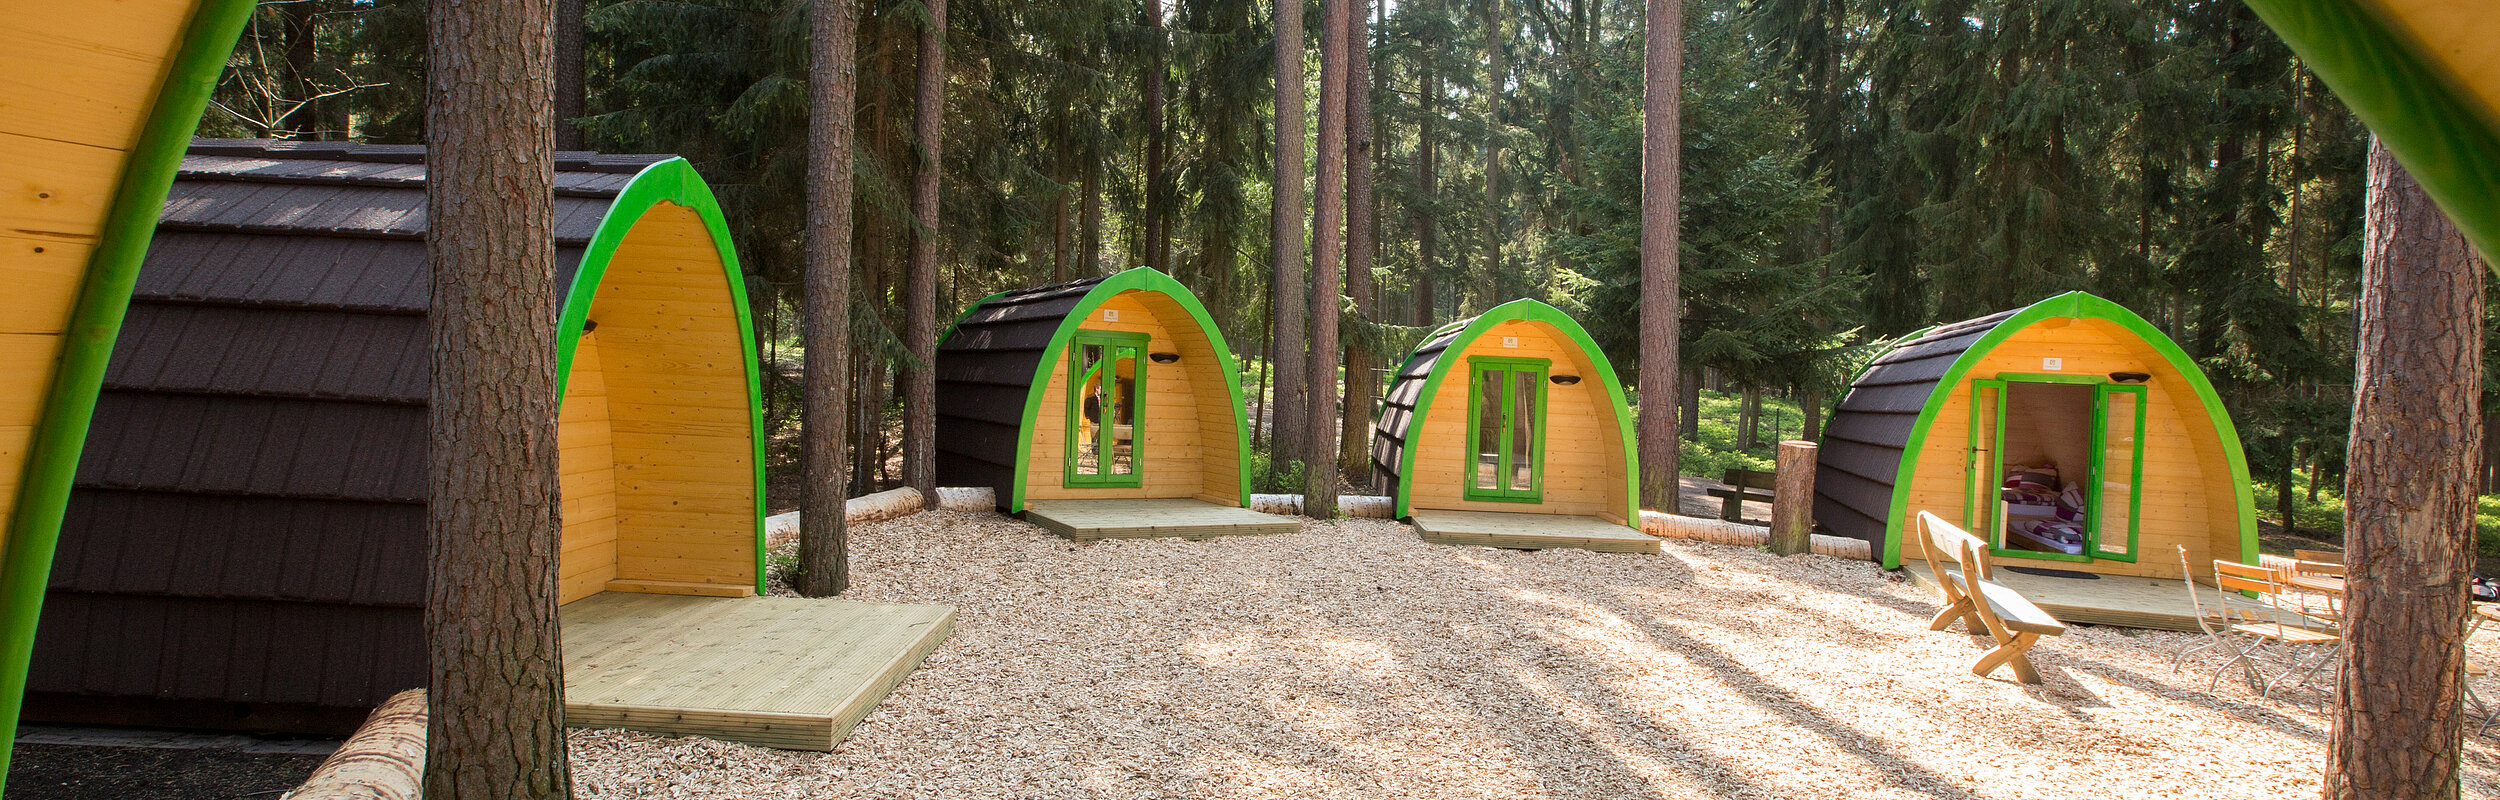 Waldcamping Brombach - Pods